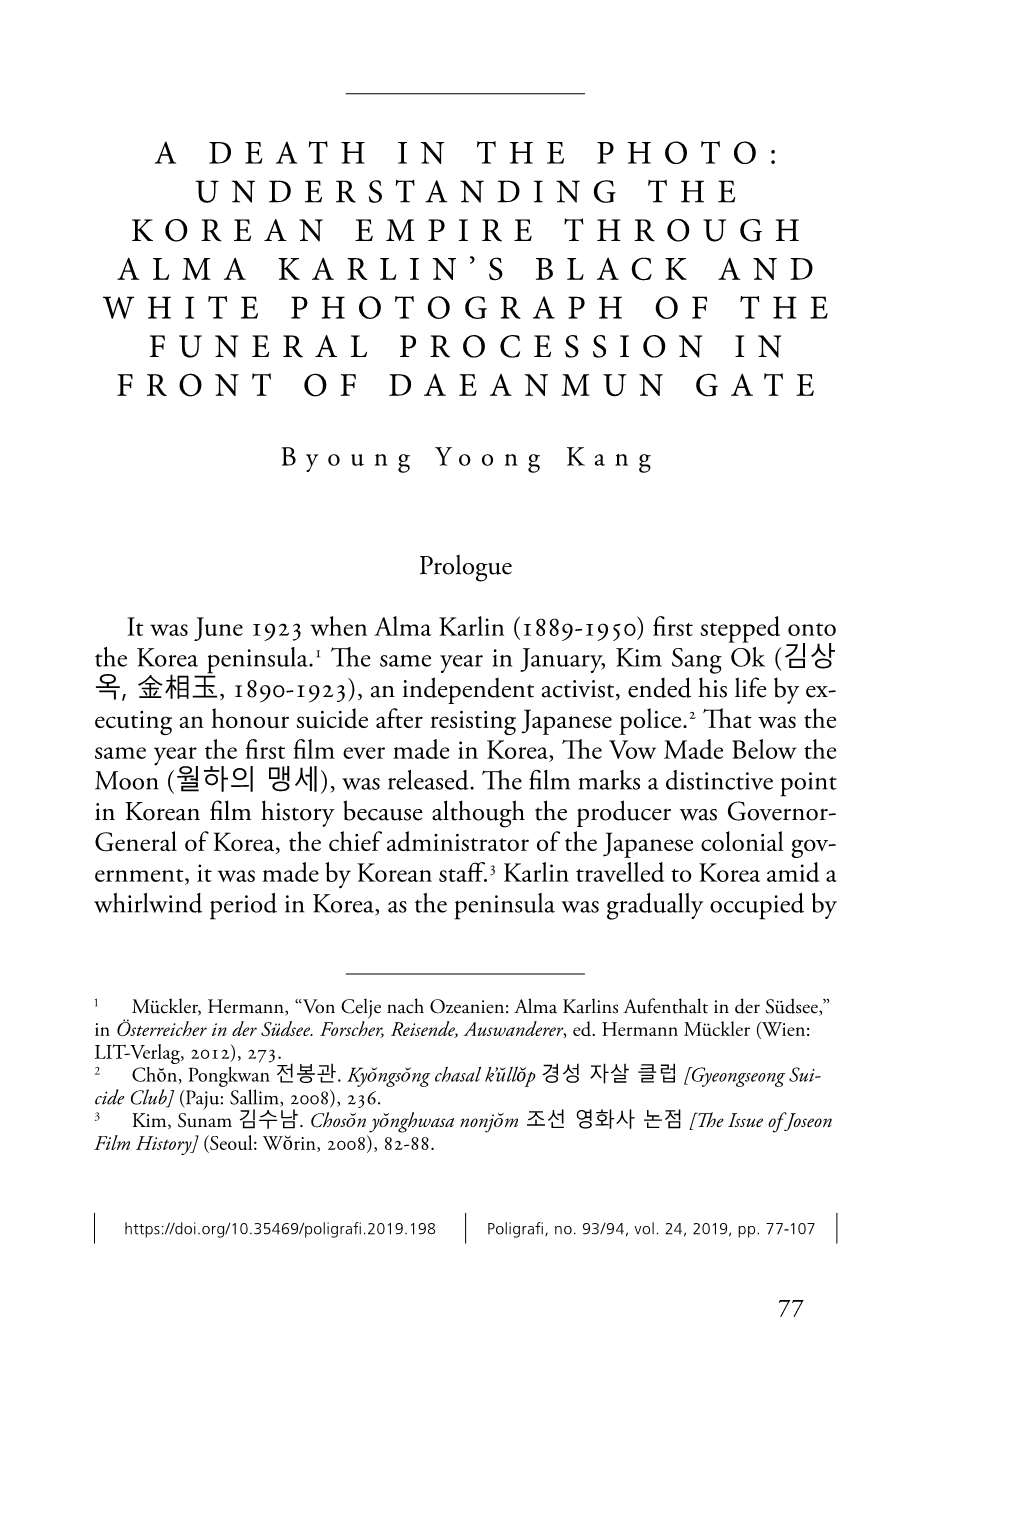 A Death in the Photo: Understanding the Korean Empire Through Alma Karlin's Black and White Photograph of the Funeral Process